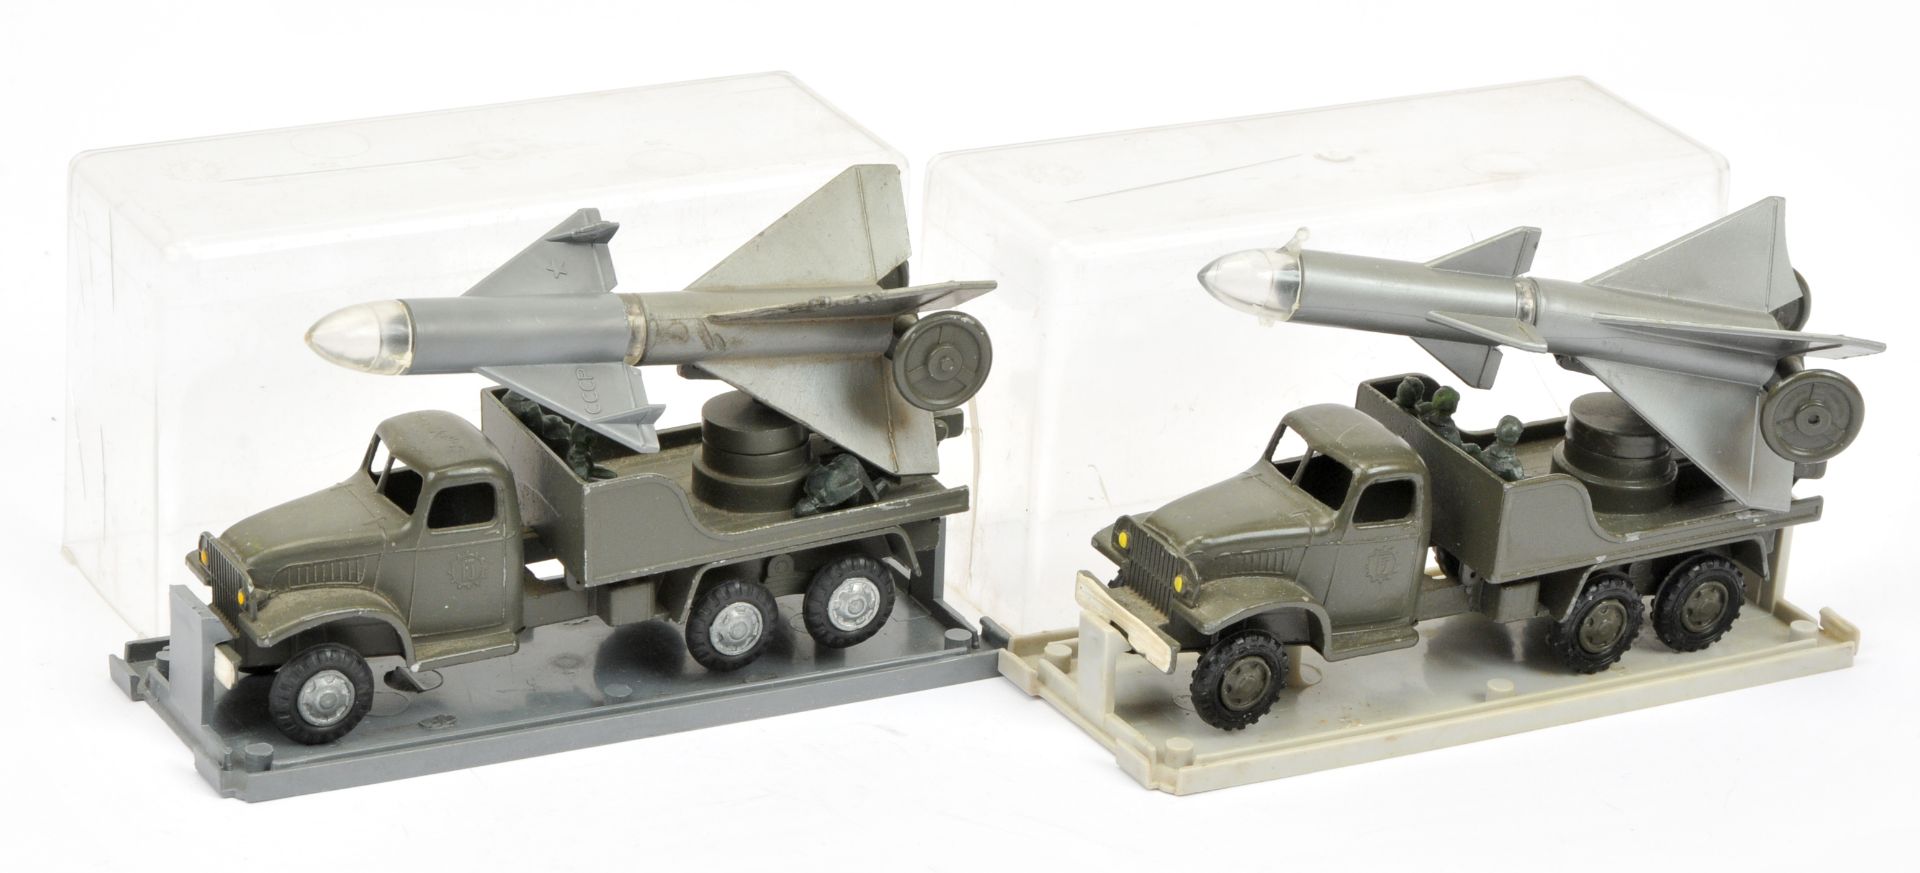 FJ Military a pair of Rocket firing lorry's - (1)  drab green with silver hubs and silver-grey ro...